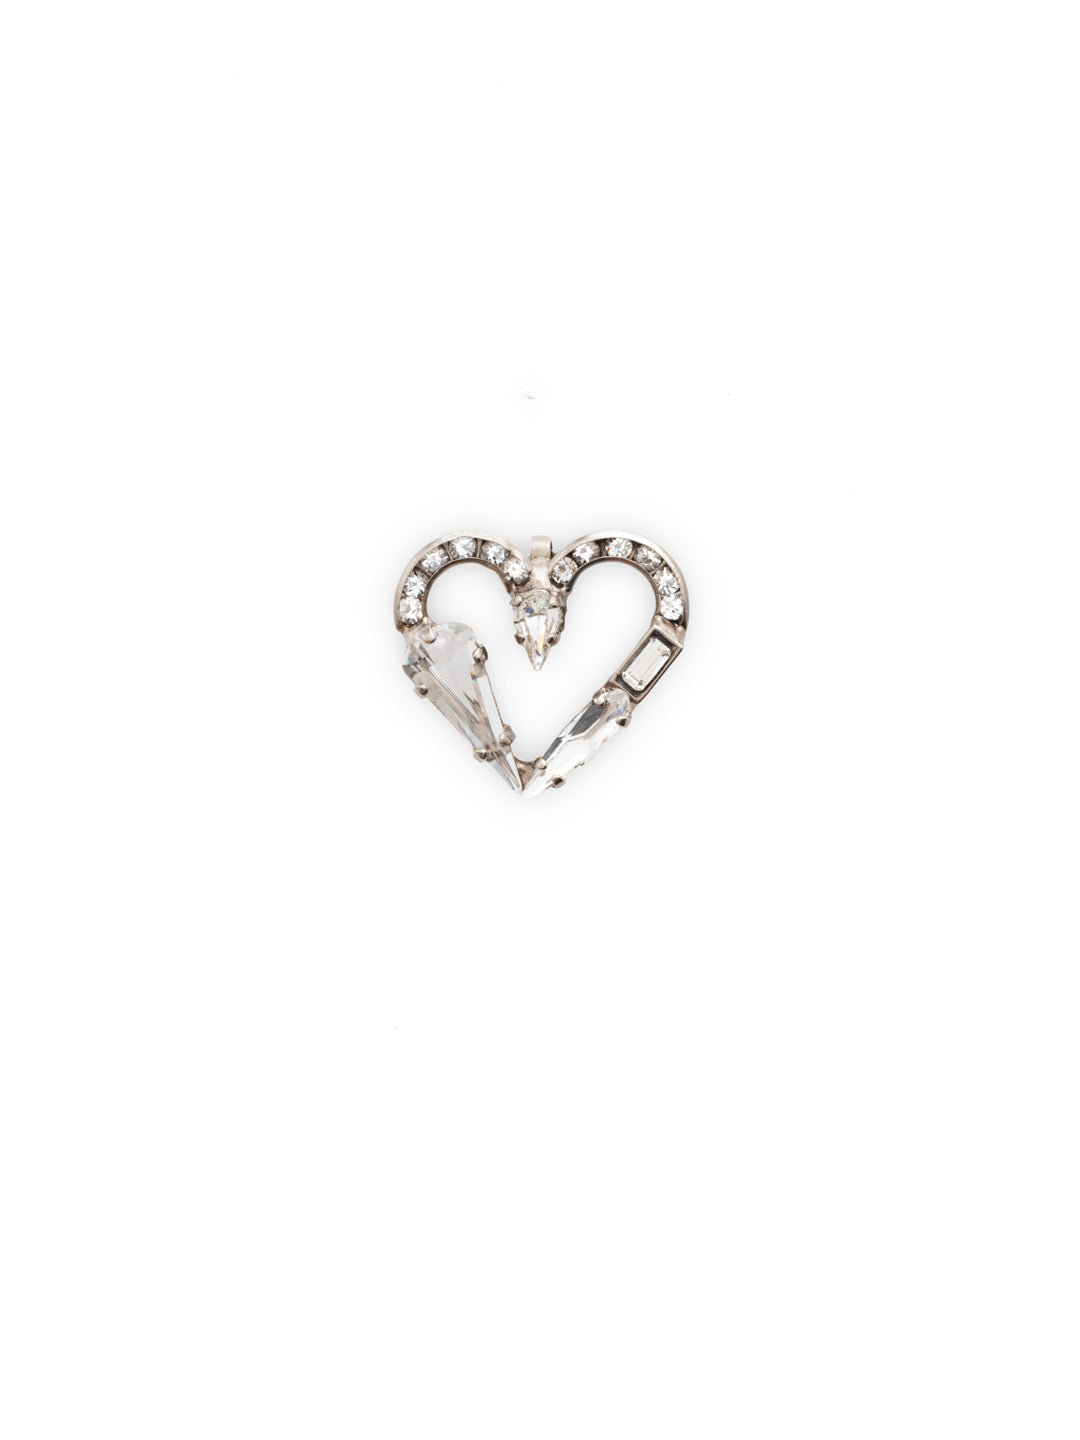 Crystal Heart Charm Charm Other Accessory - CES40ASCRY